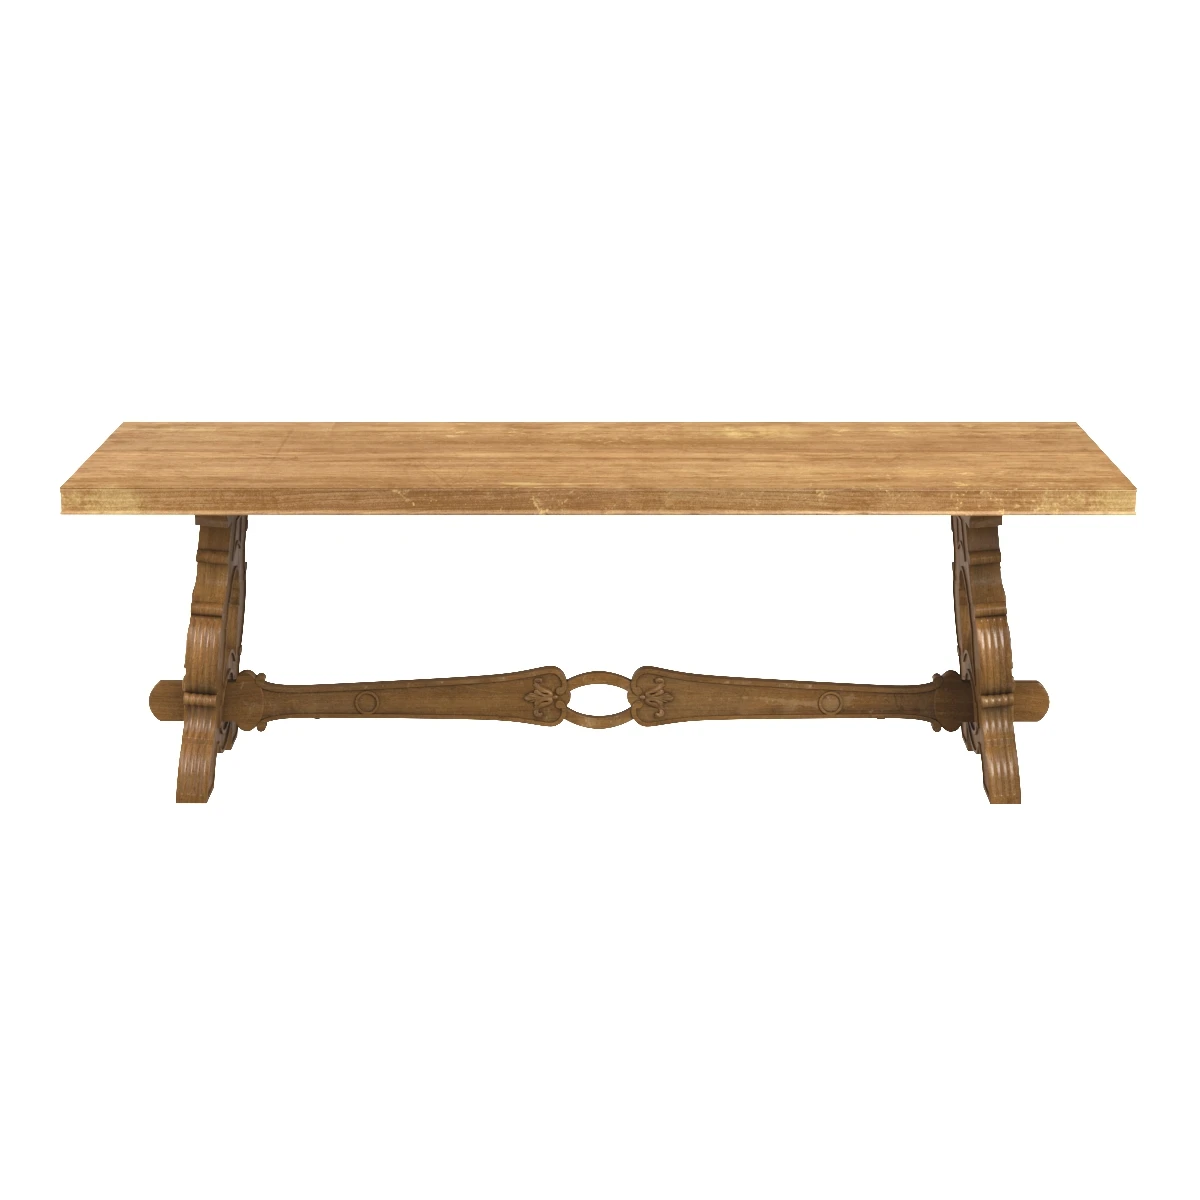 Early 20th Century French Carved Bleached Oak Marquetry Trestle Dining Table 3D Model_06